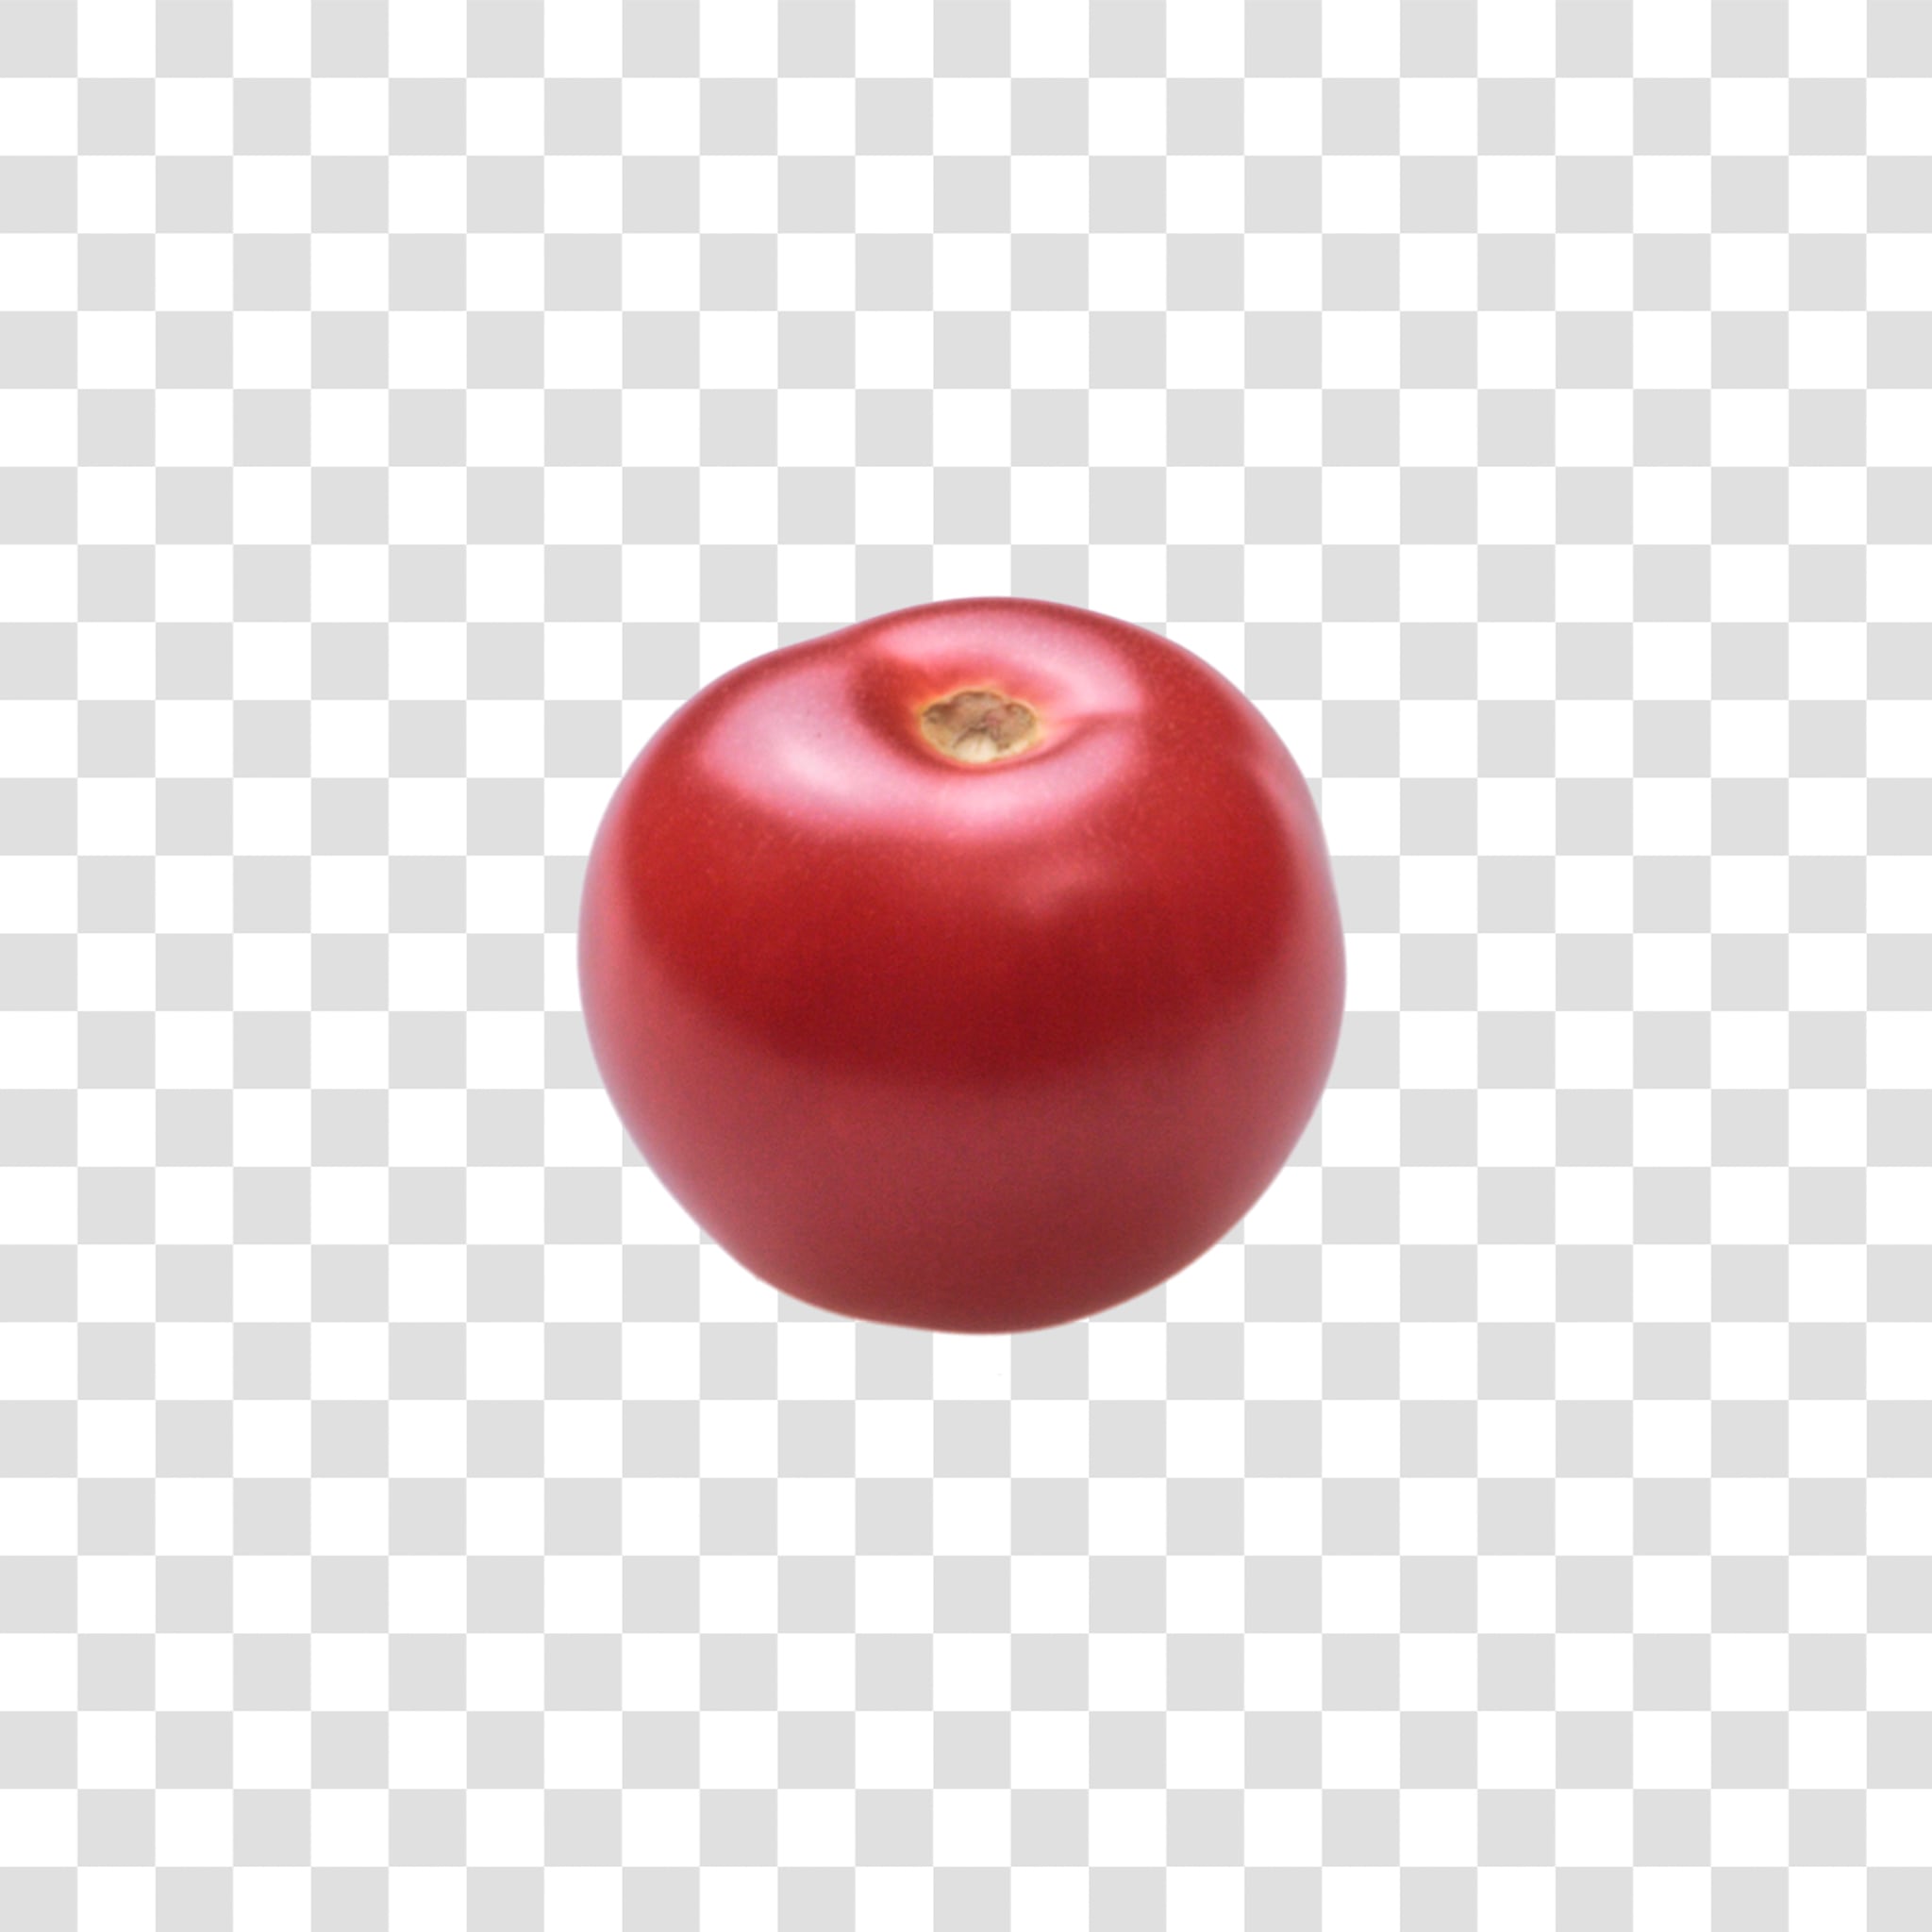 Tomato image with transparent background